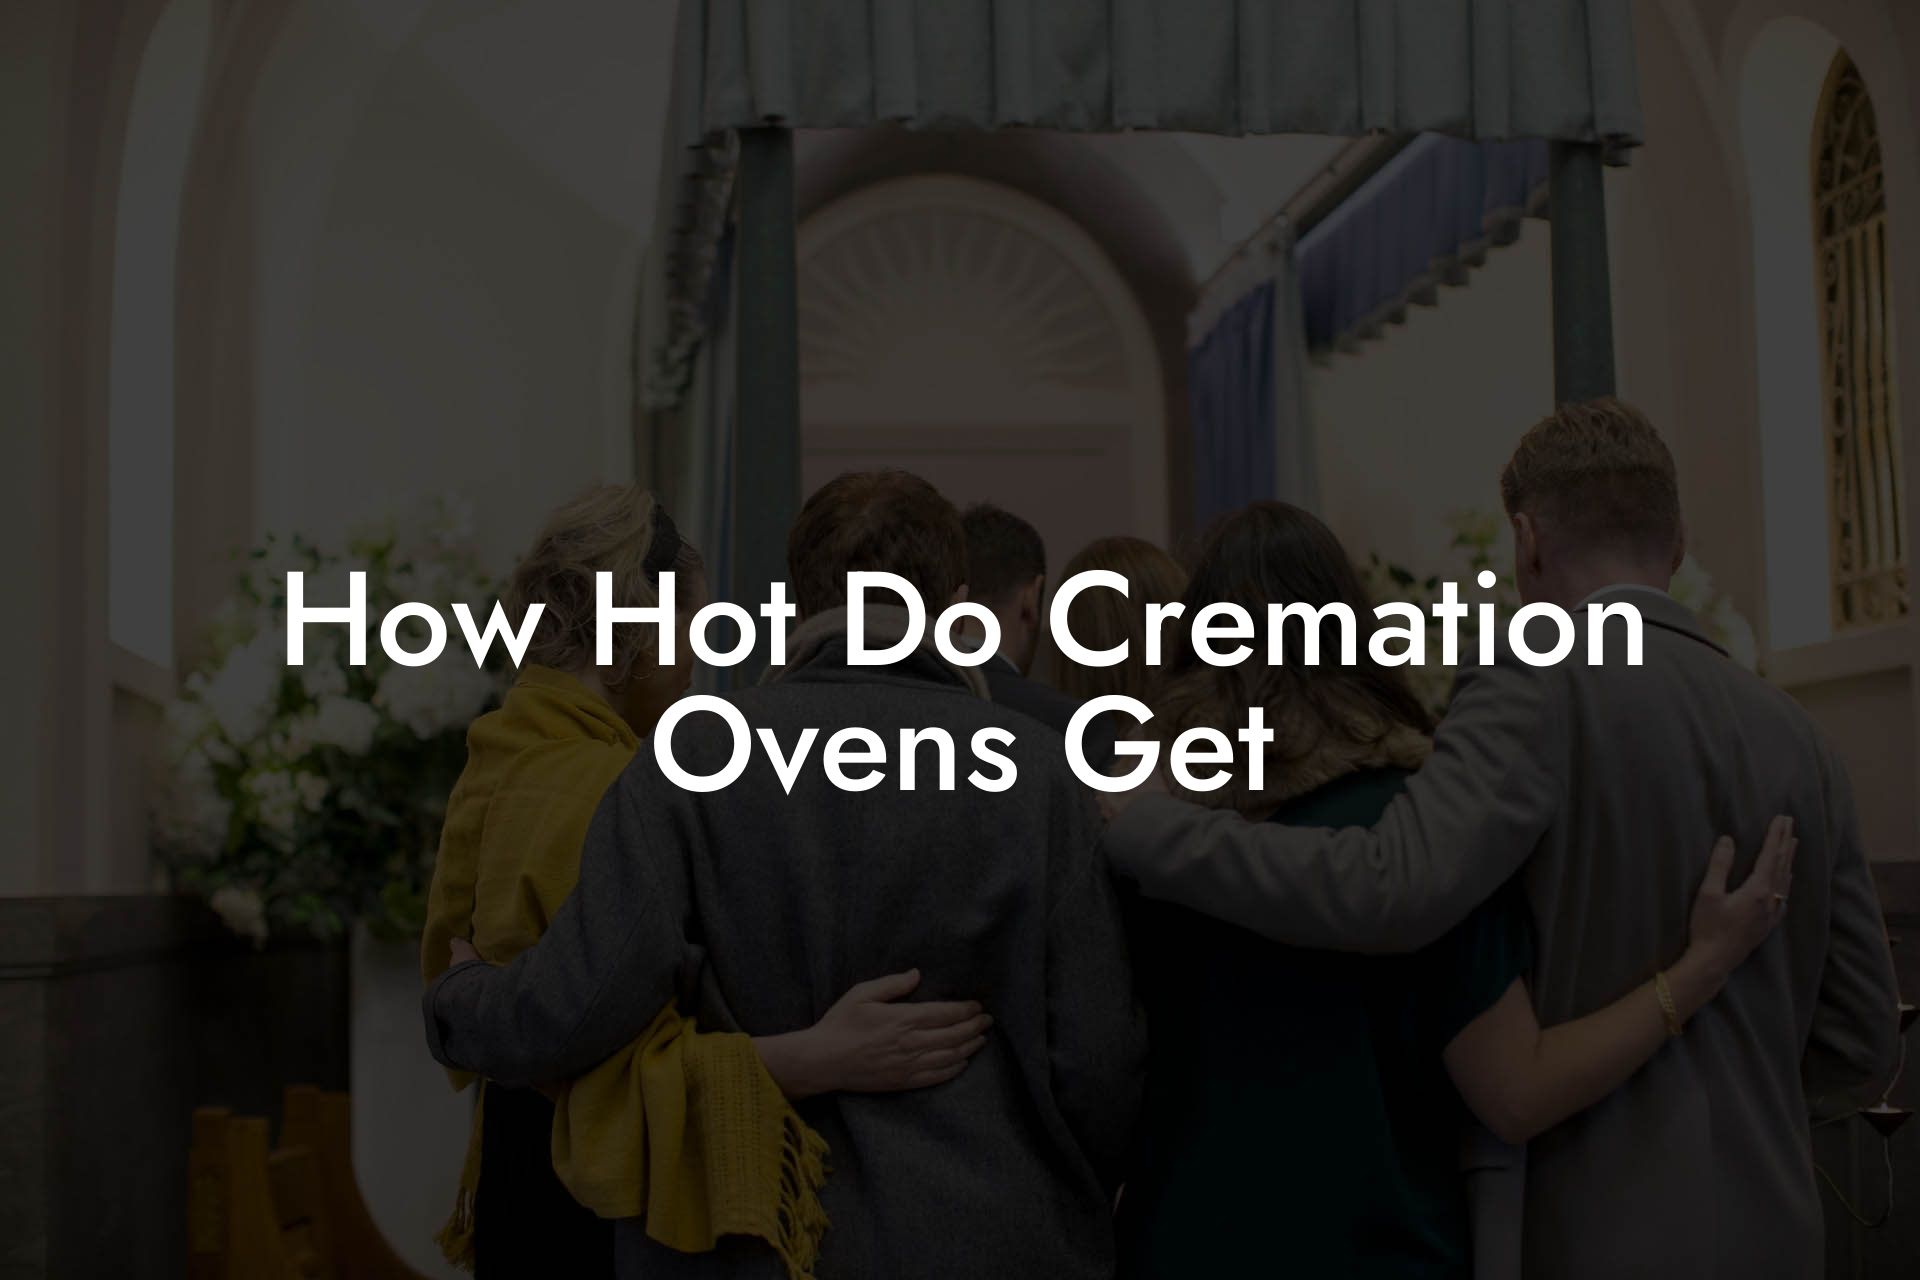 How Hot Do Cremation Ovens Get